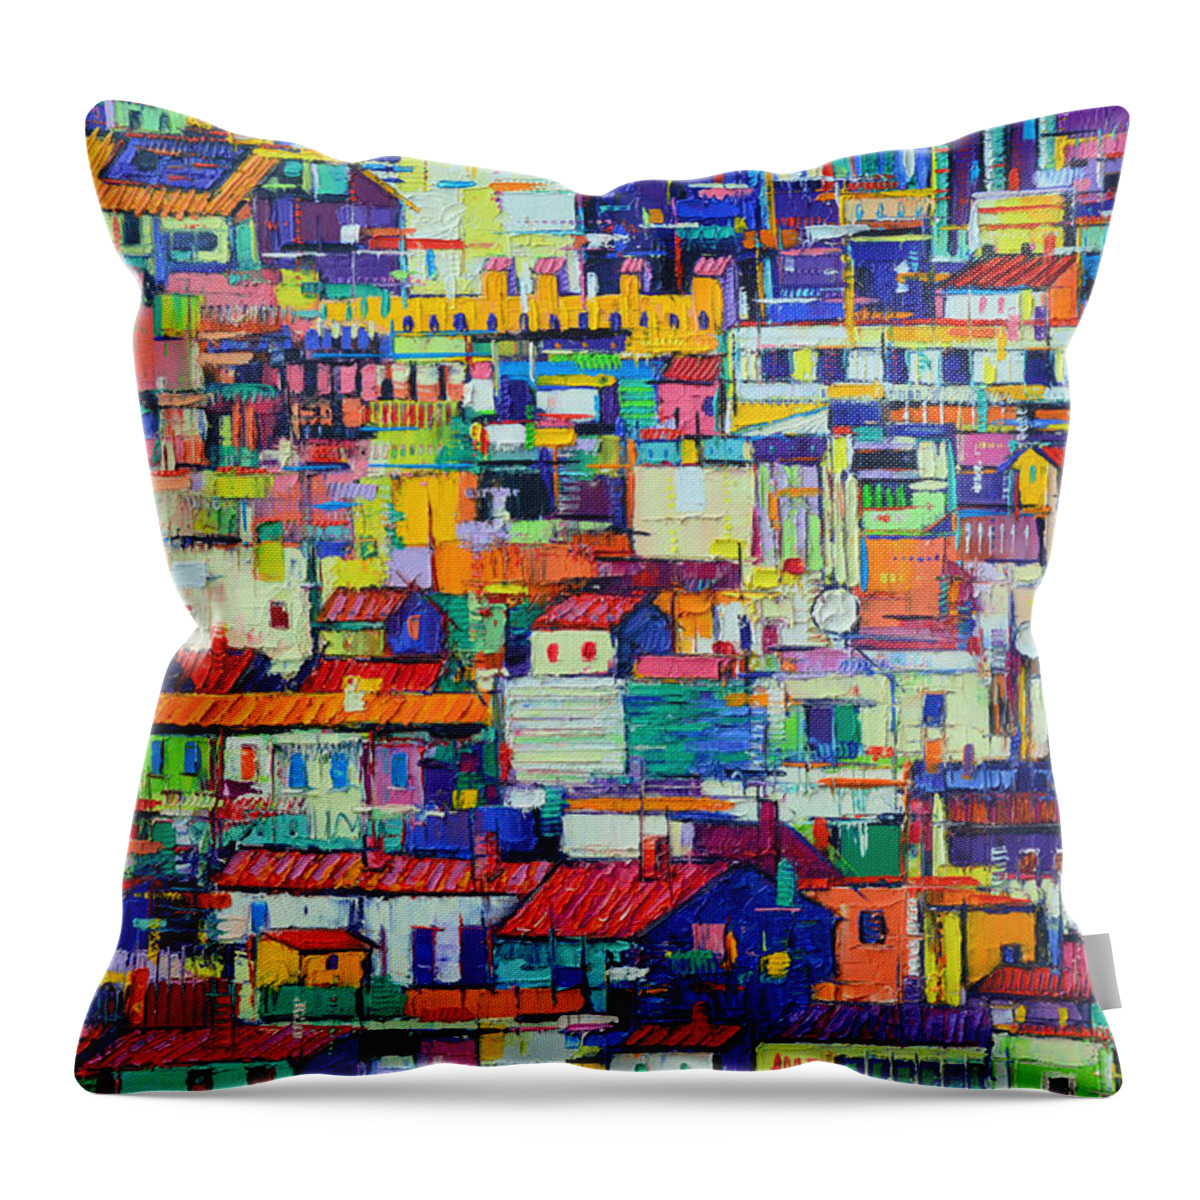 Abstract Throw Pillow featuring the painting ABSTRACT CITY PATTERNS tep 37 textural impasto palette knife oil painting city by Ana Maria Edulescu by Ana Maria Edulescu